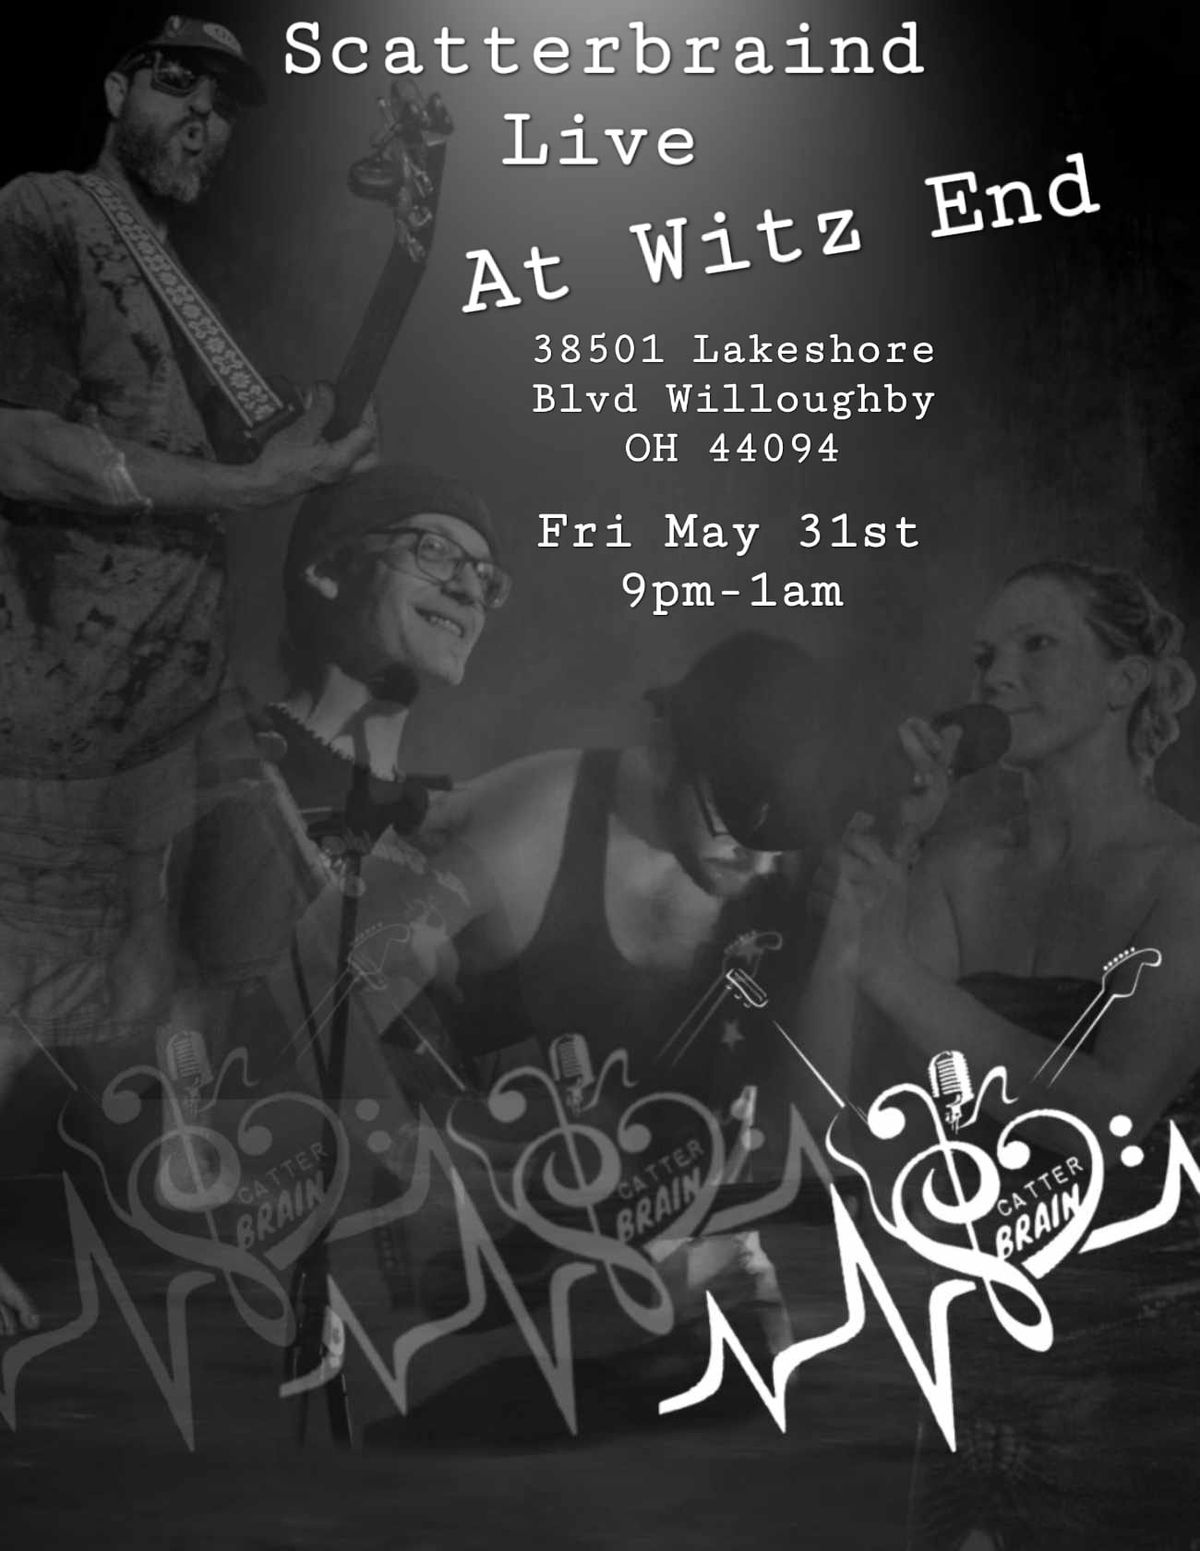 Scatterbraind Live At Witz End 